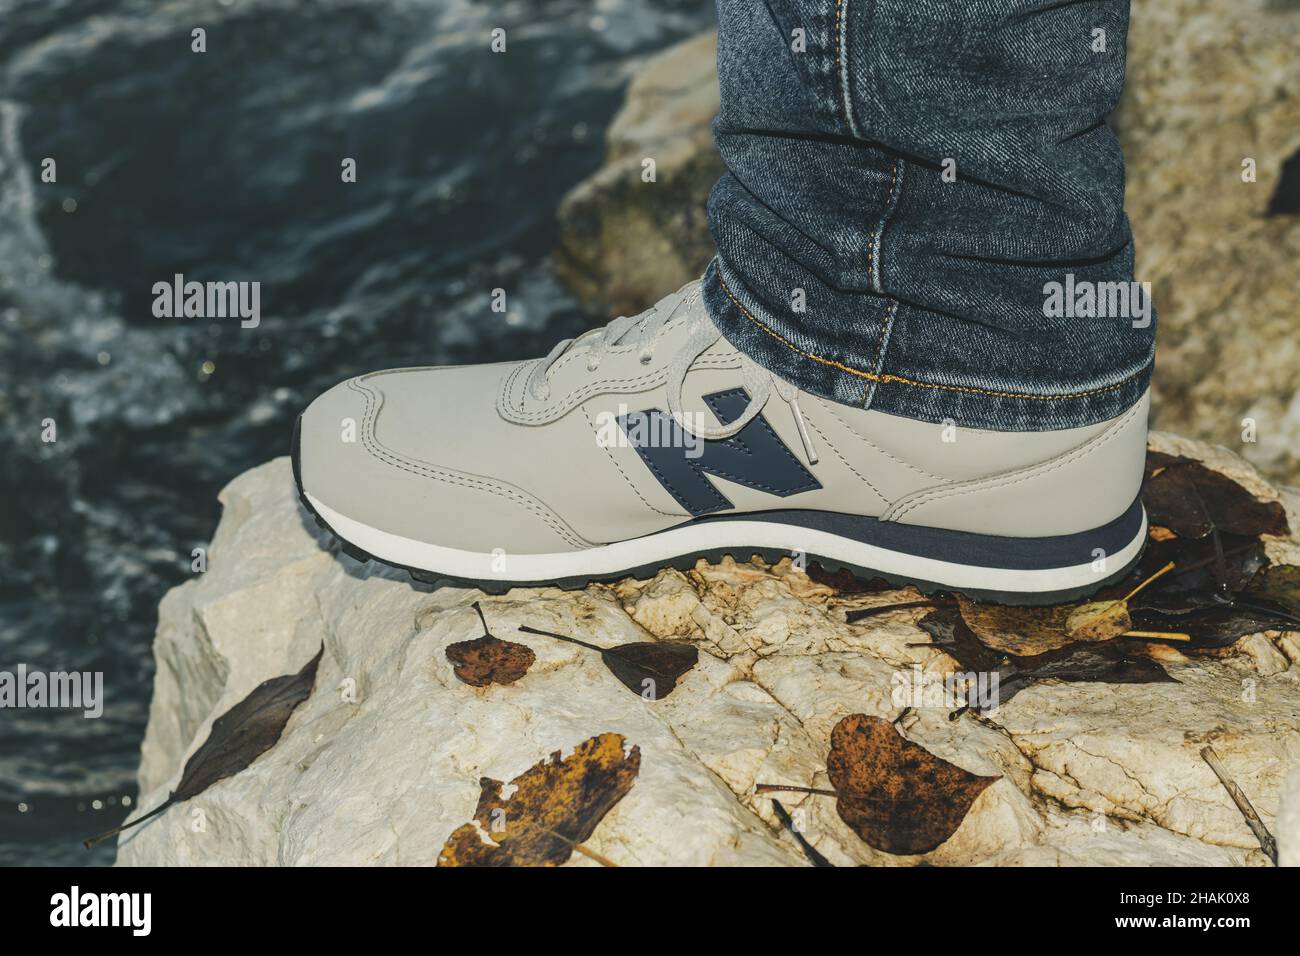 New Balance Sneaker High Resolution Stock Photography and Images - Alamy